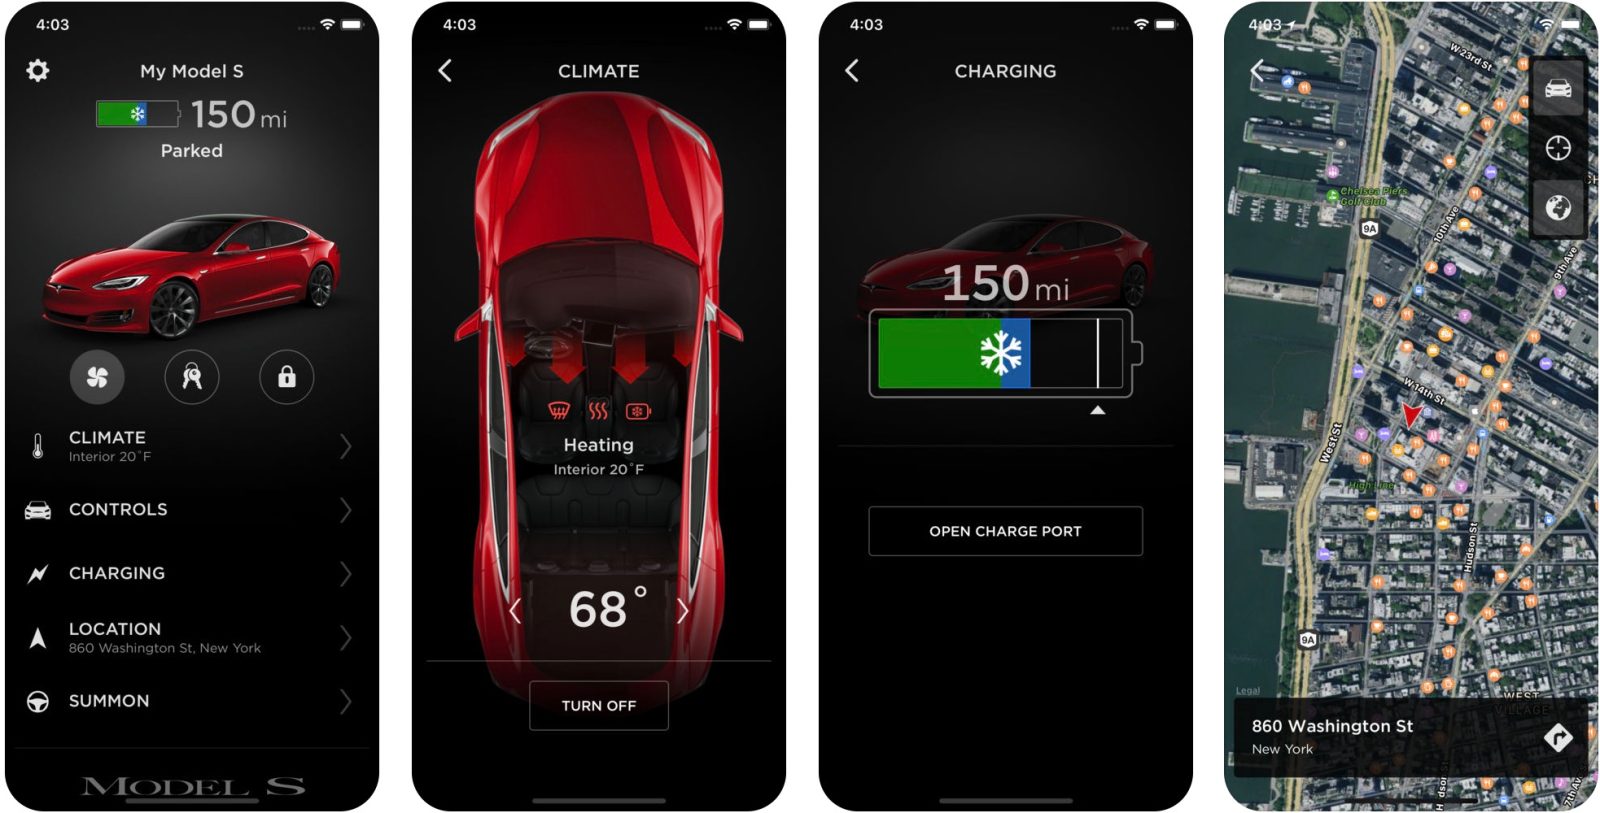 Tesla updates mobile app to bring new cold weather convenience features